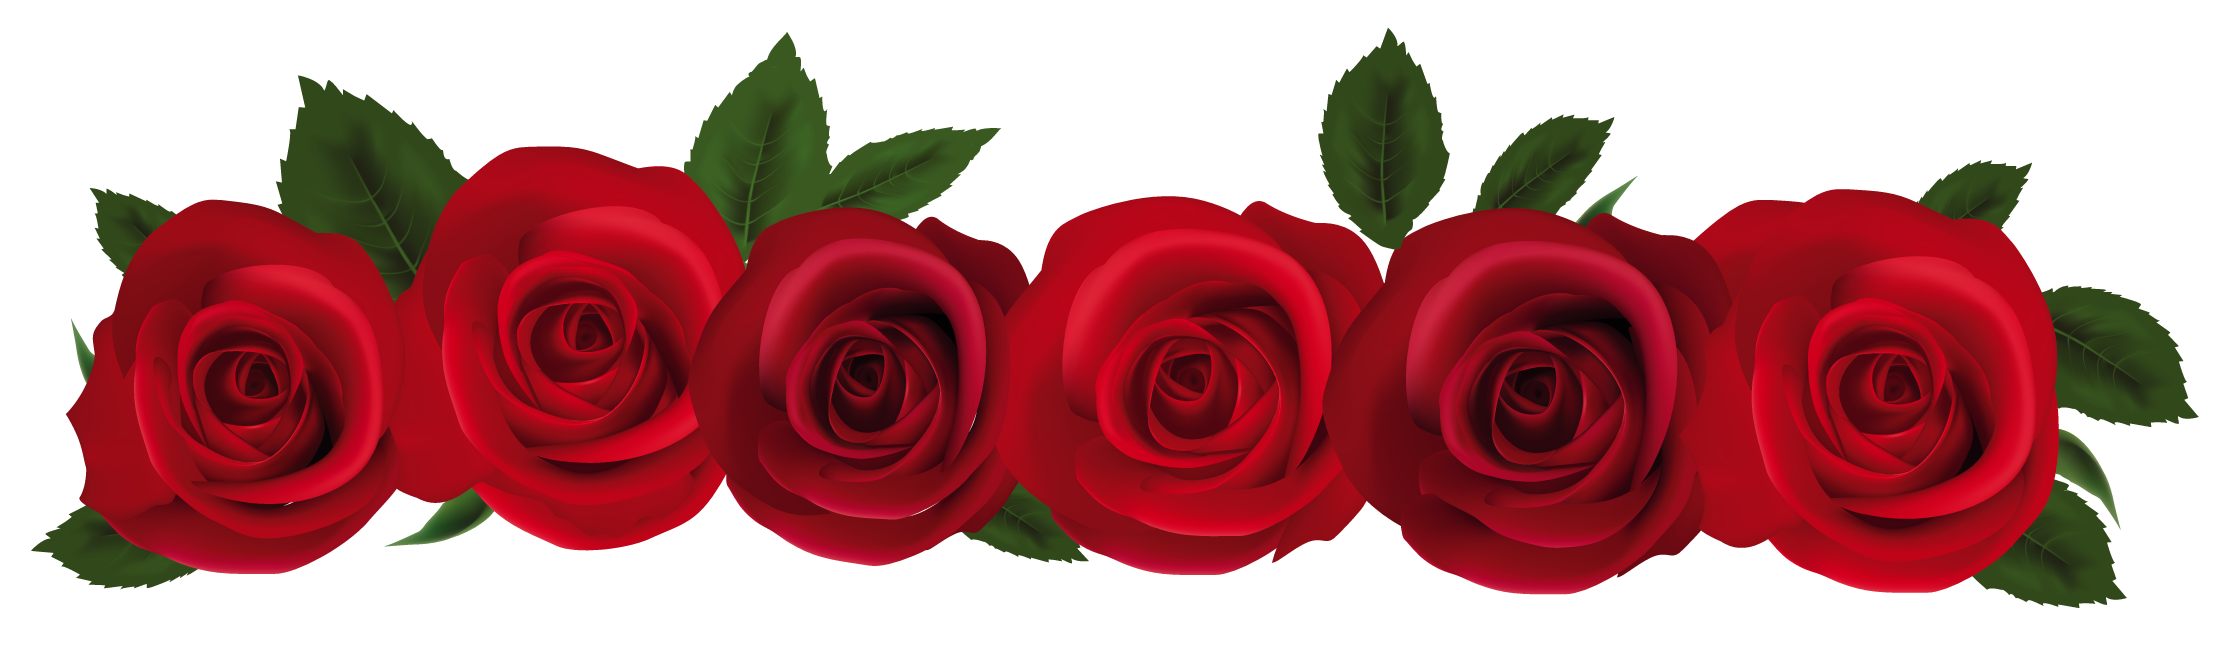 Red Rose Border Clip Art Amazing Wallpapers